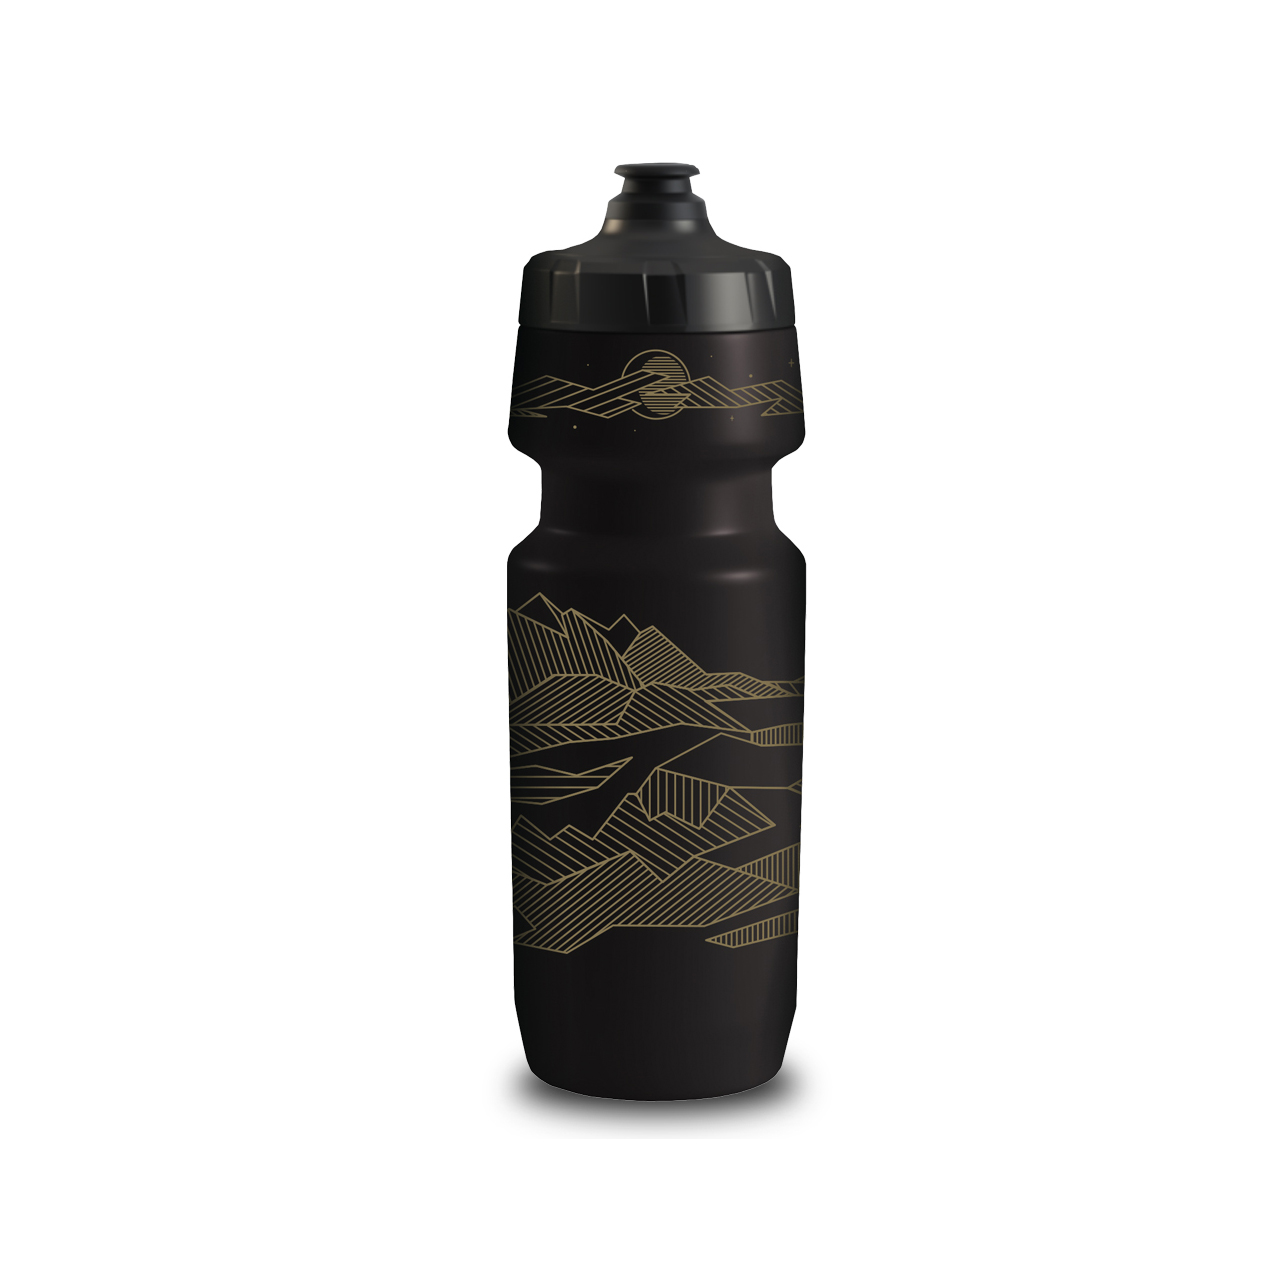 AWC_Site_Designs_Layers_0016_Canyon_Bottle